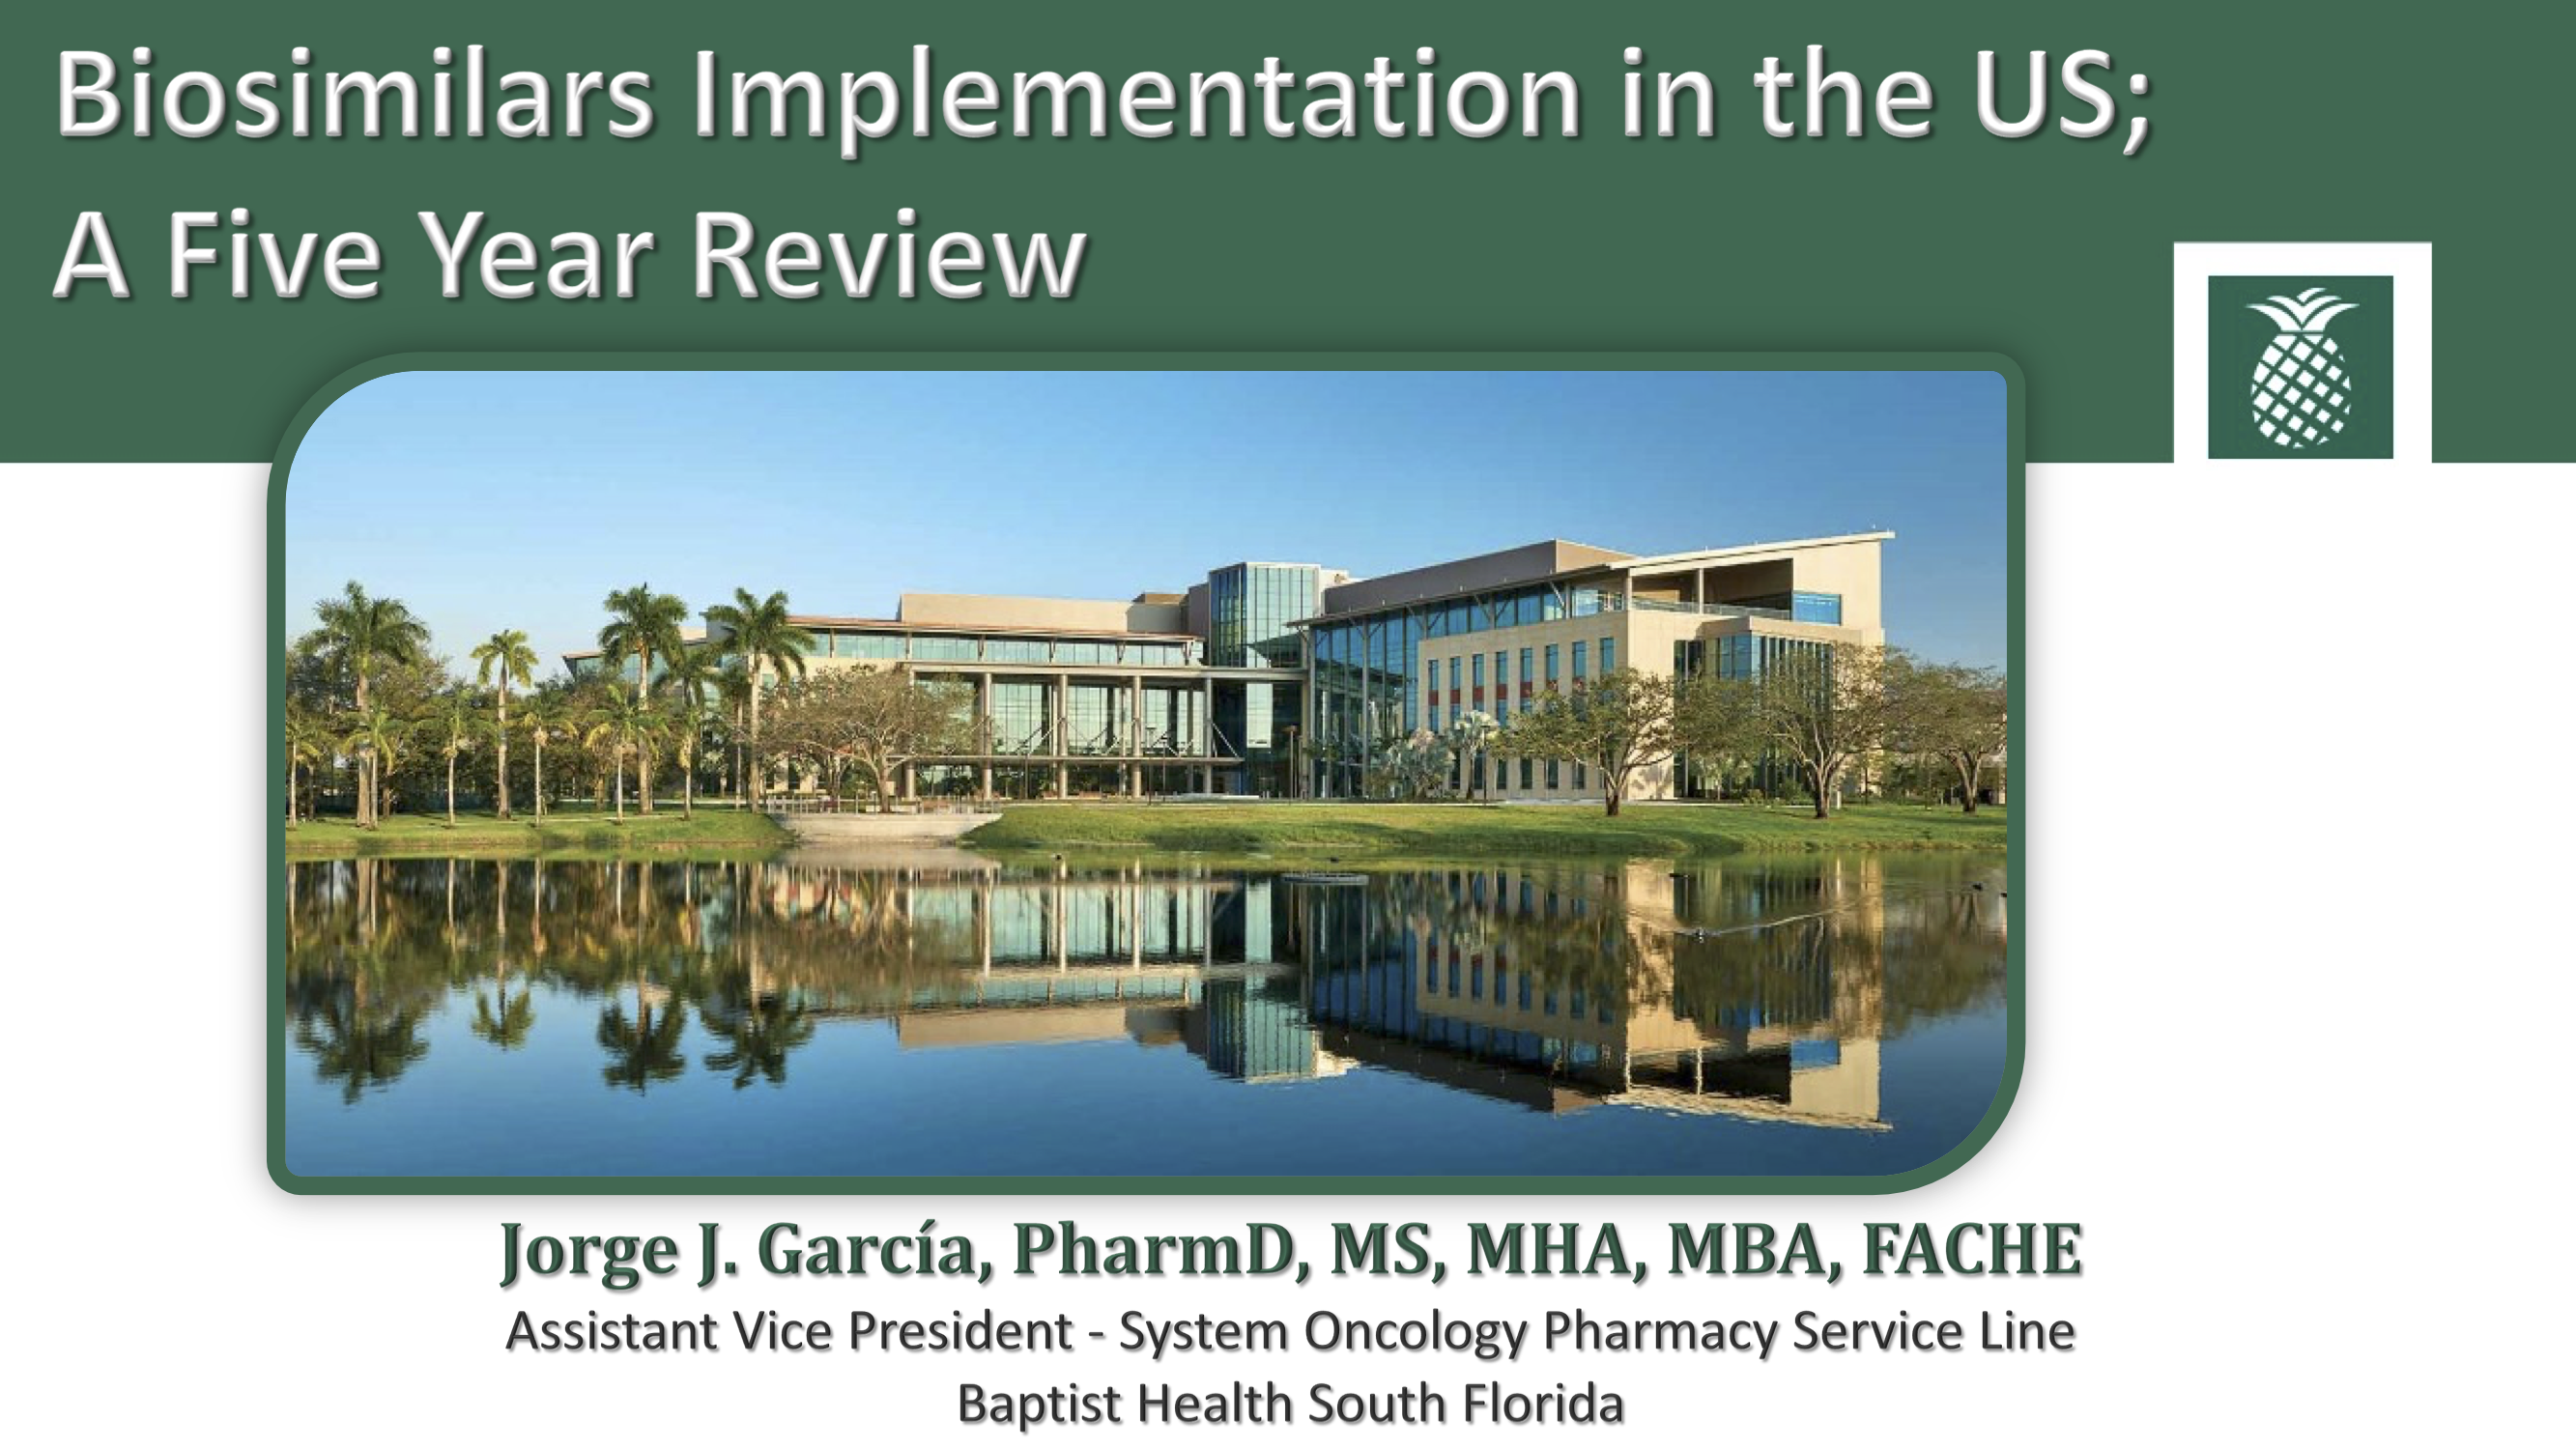 Biosimilars Implementation in the US: A Five Year Review